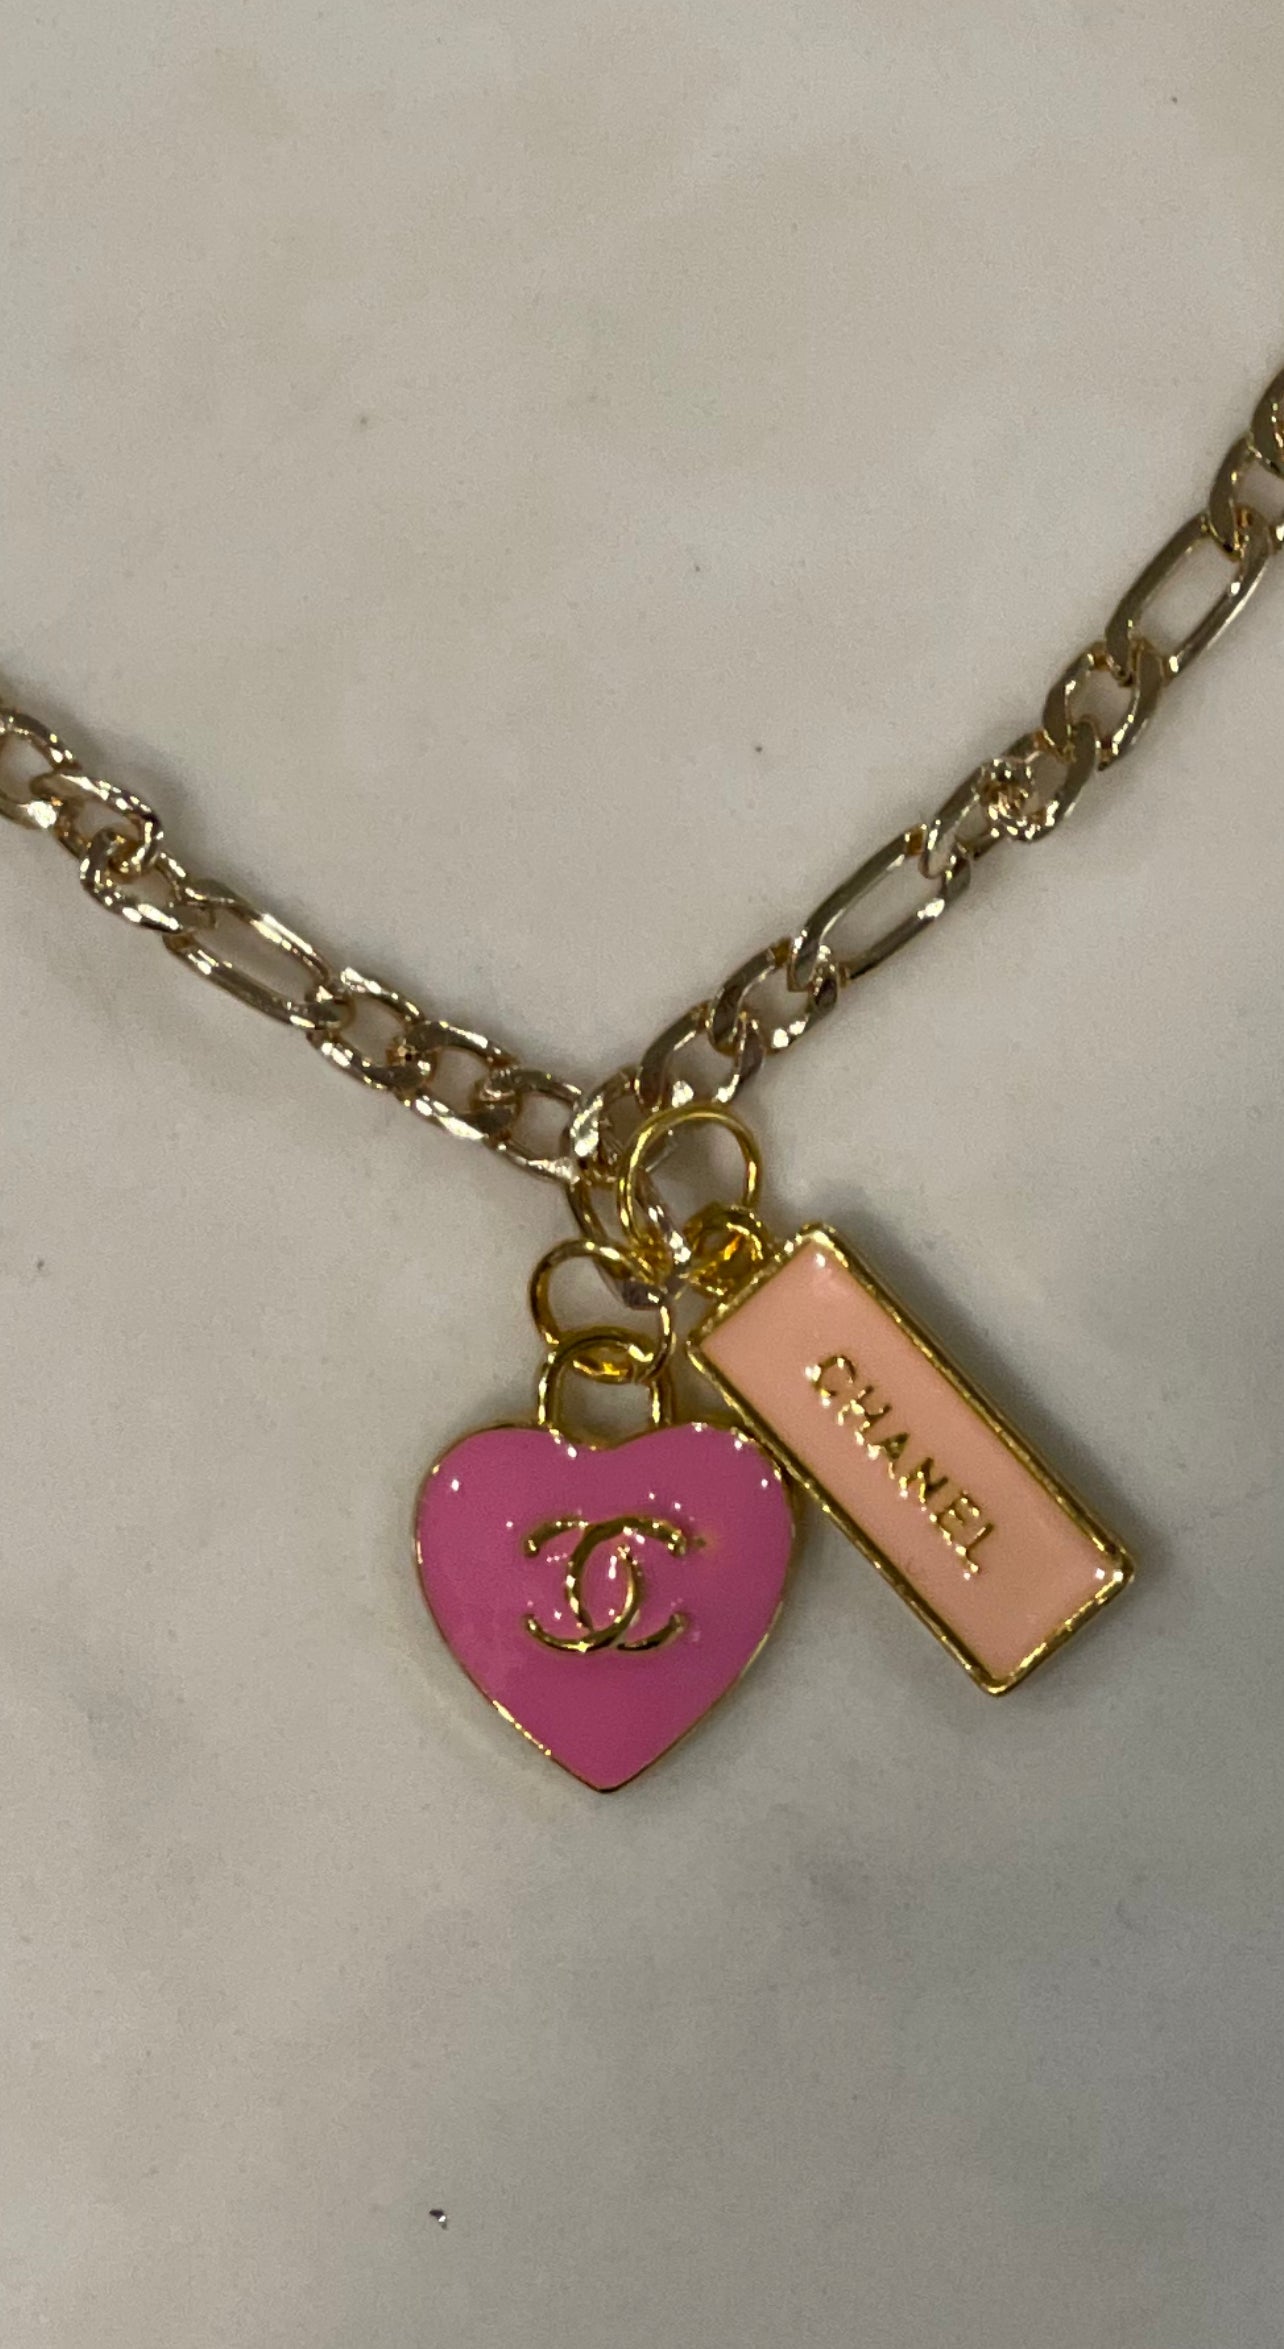 Vintage and Musthaves. Chanel perfume necklace